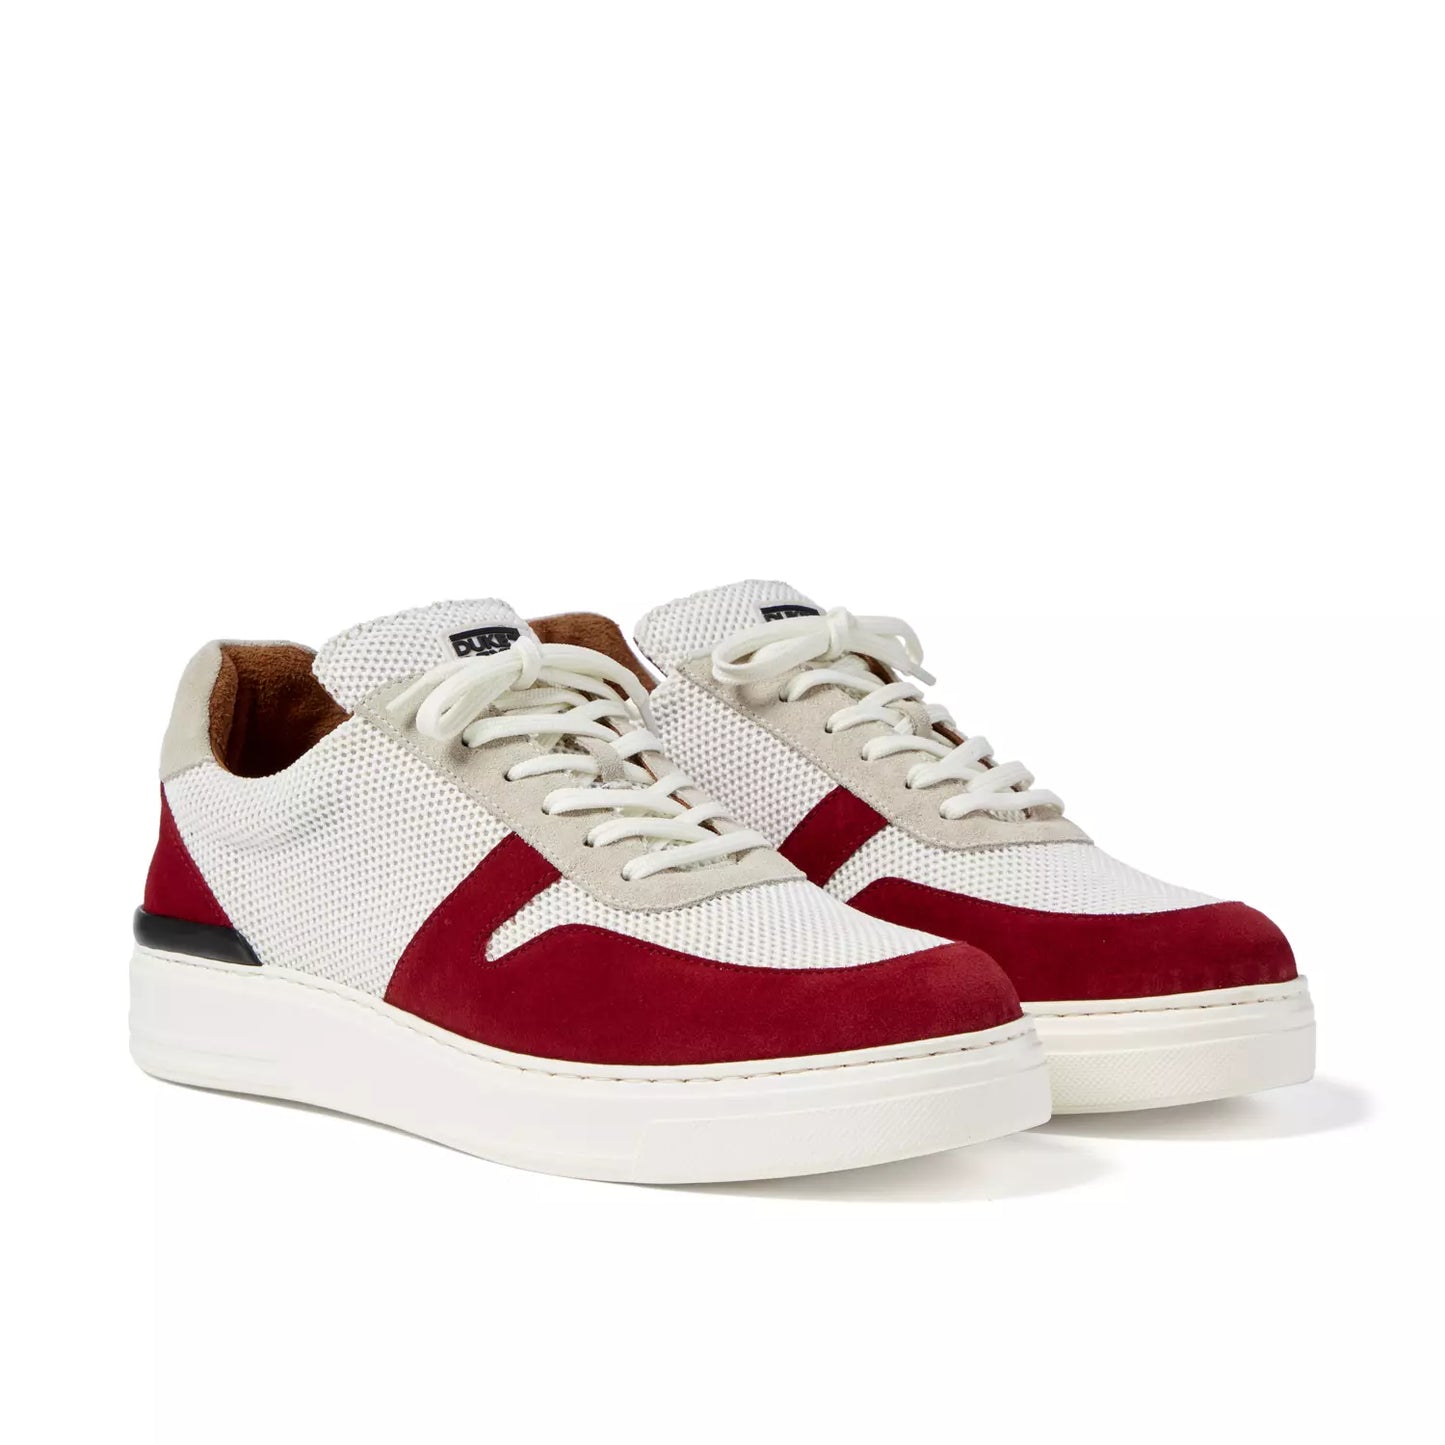 Duke and Dexter Ritchie Rio sneakers for men extra light comfortable White and Burgundy front view